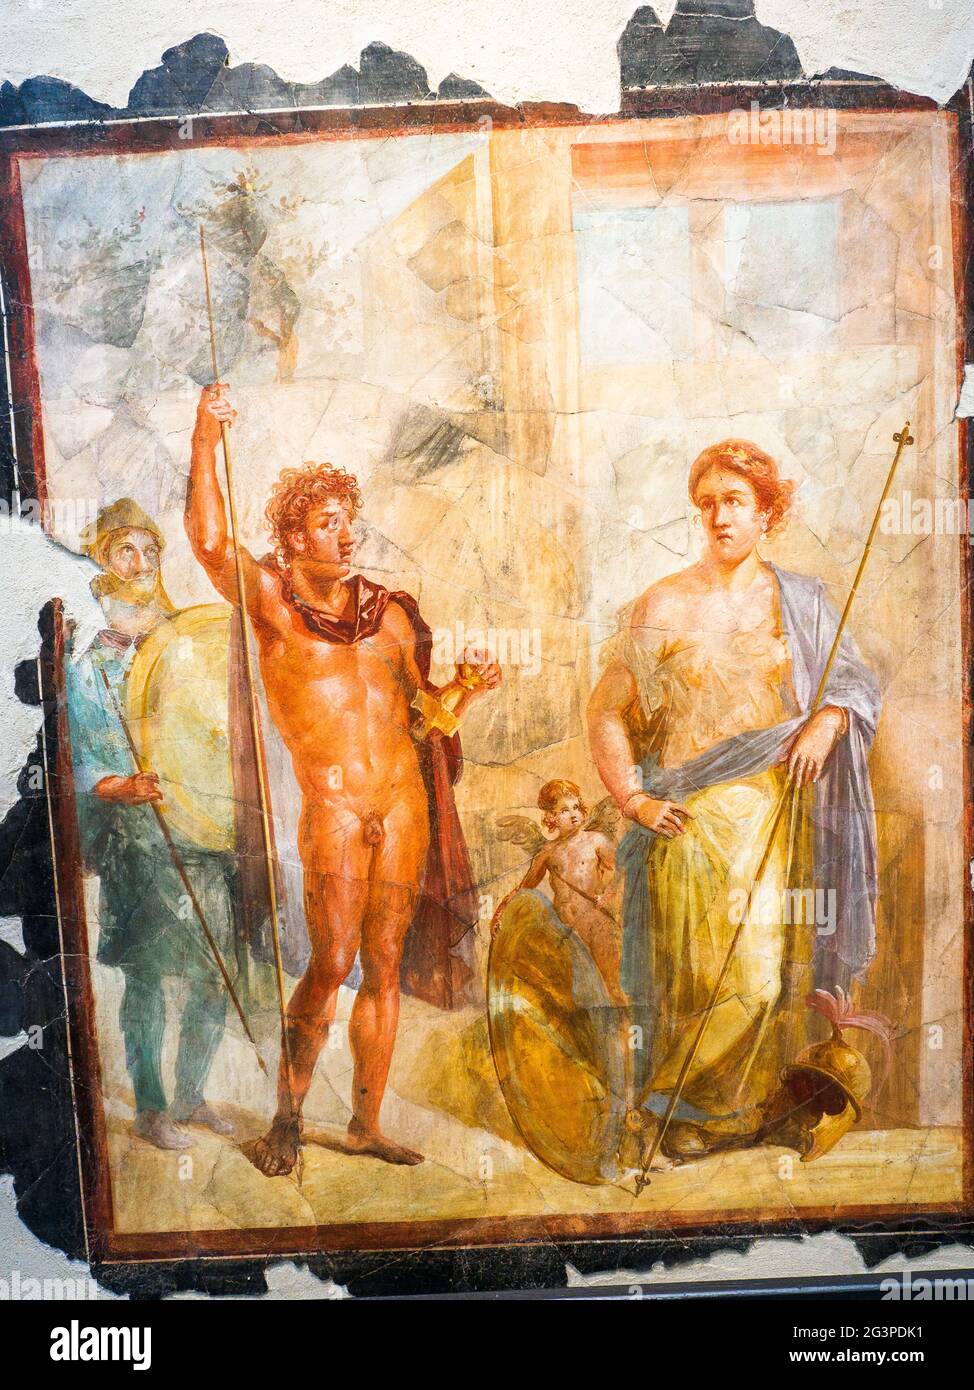 Decorative fresco depicting the wedding of Alexander and Roxanne or Mars and Aphrodite (period of Nero (54-68 AD) - Pompeii archaeological site, Italy Stock Photo